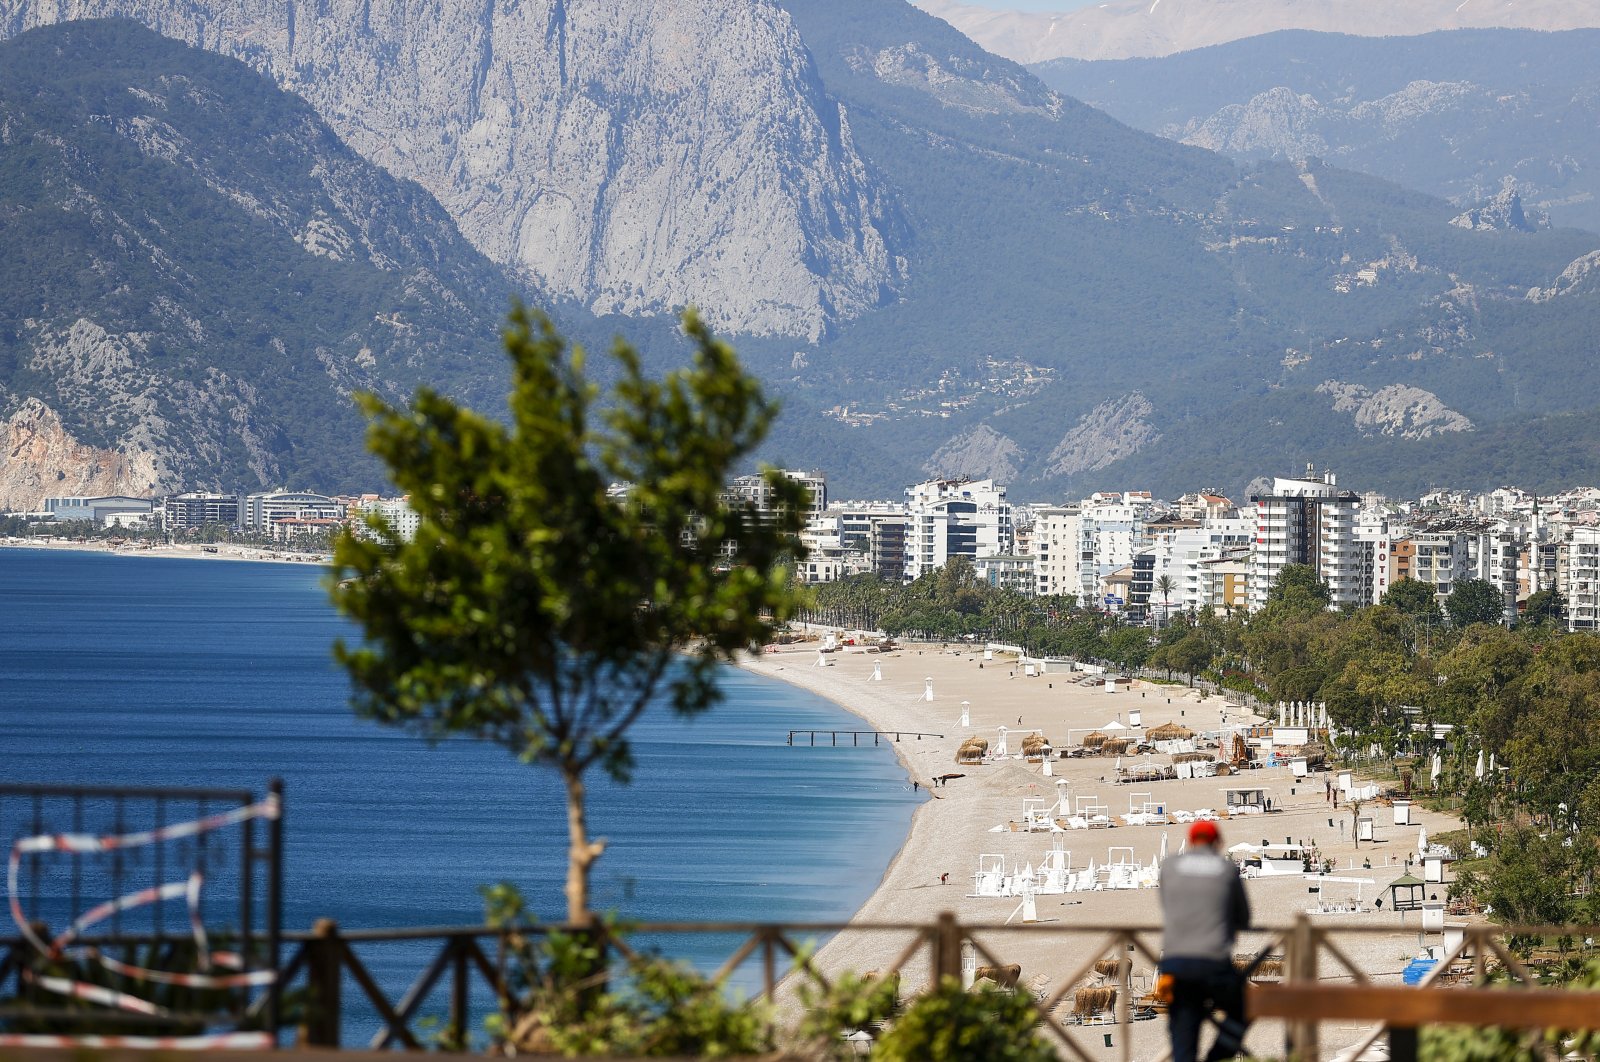 A view of a beach in the Mediterranean resort city of Antalya, May 22, 2021. (AA Photo)